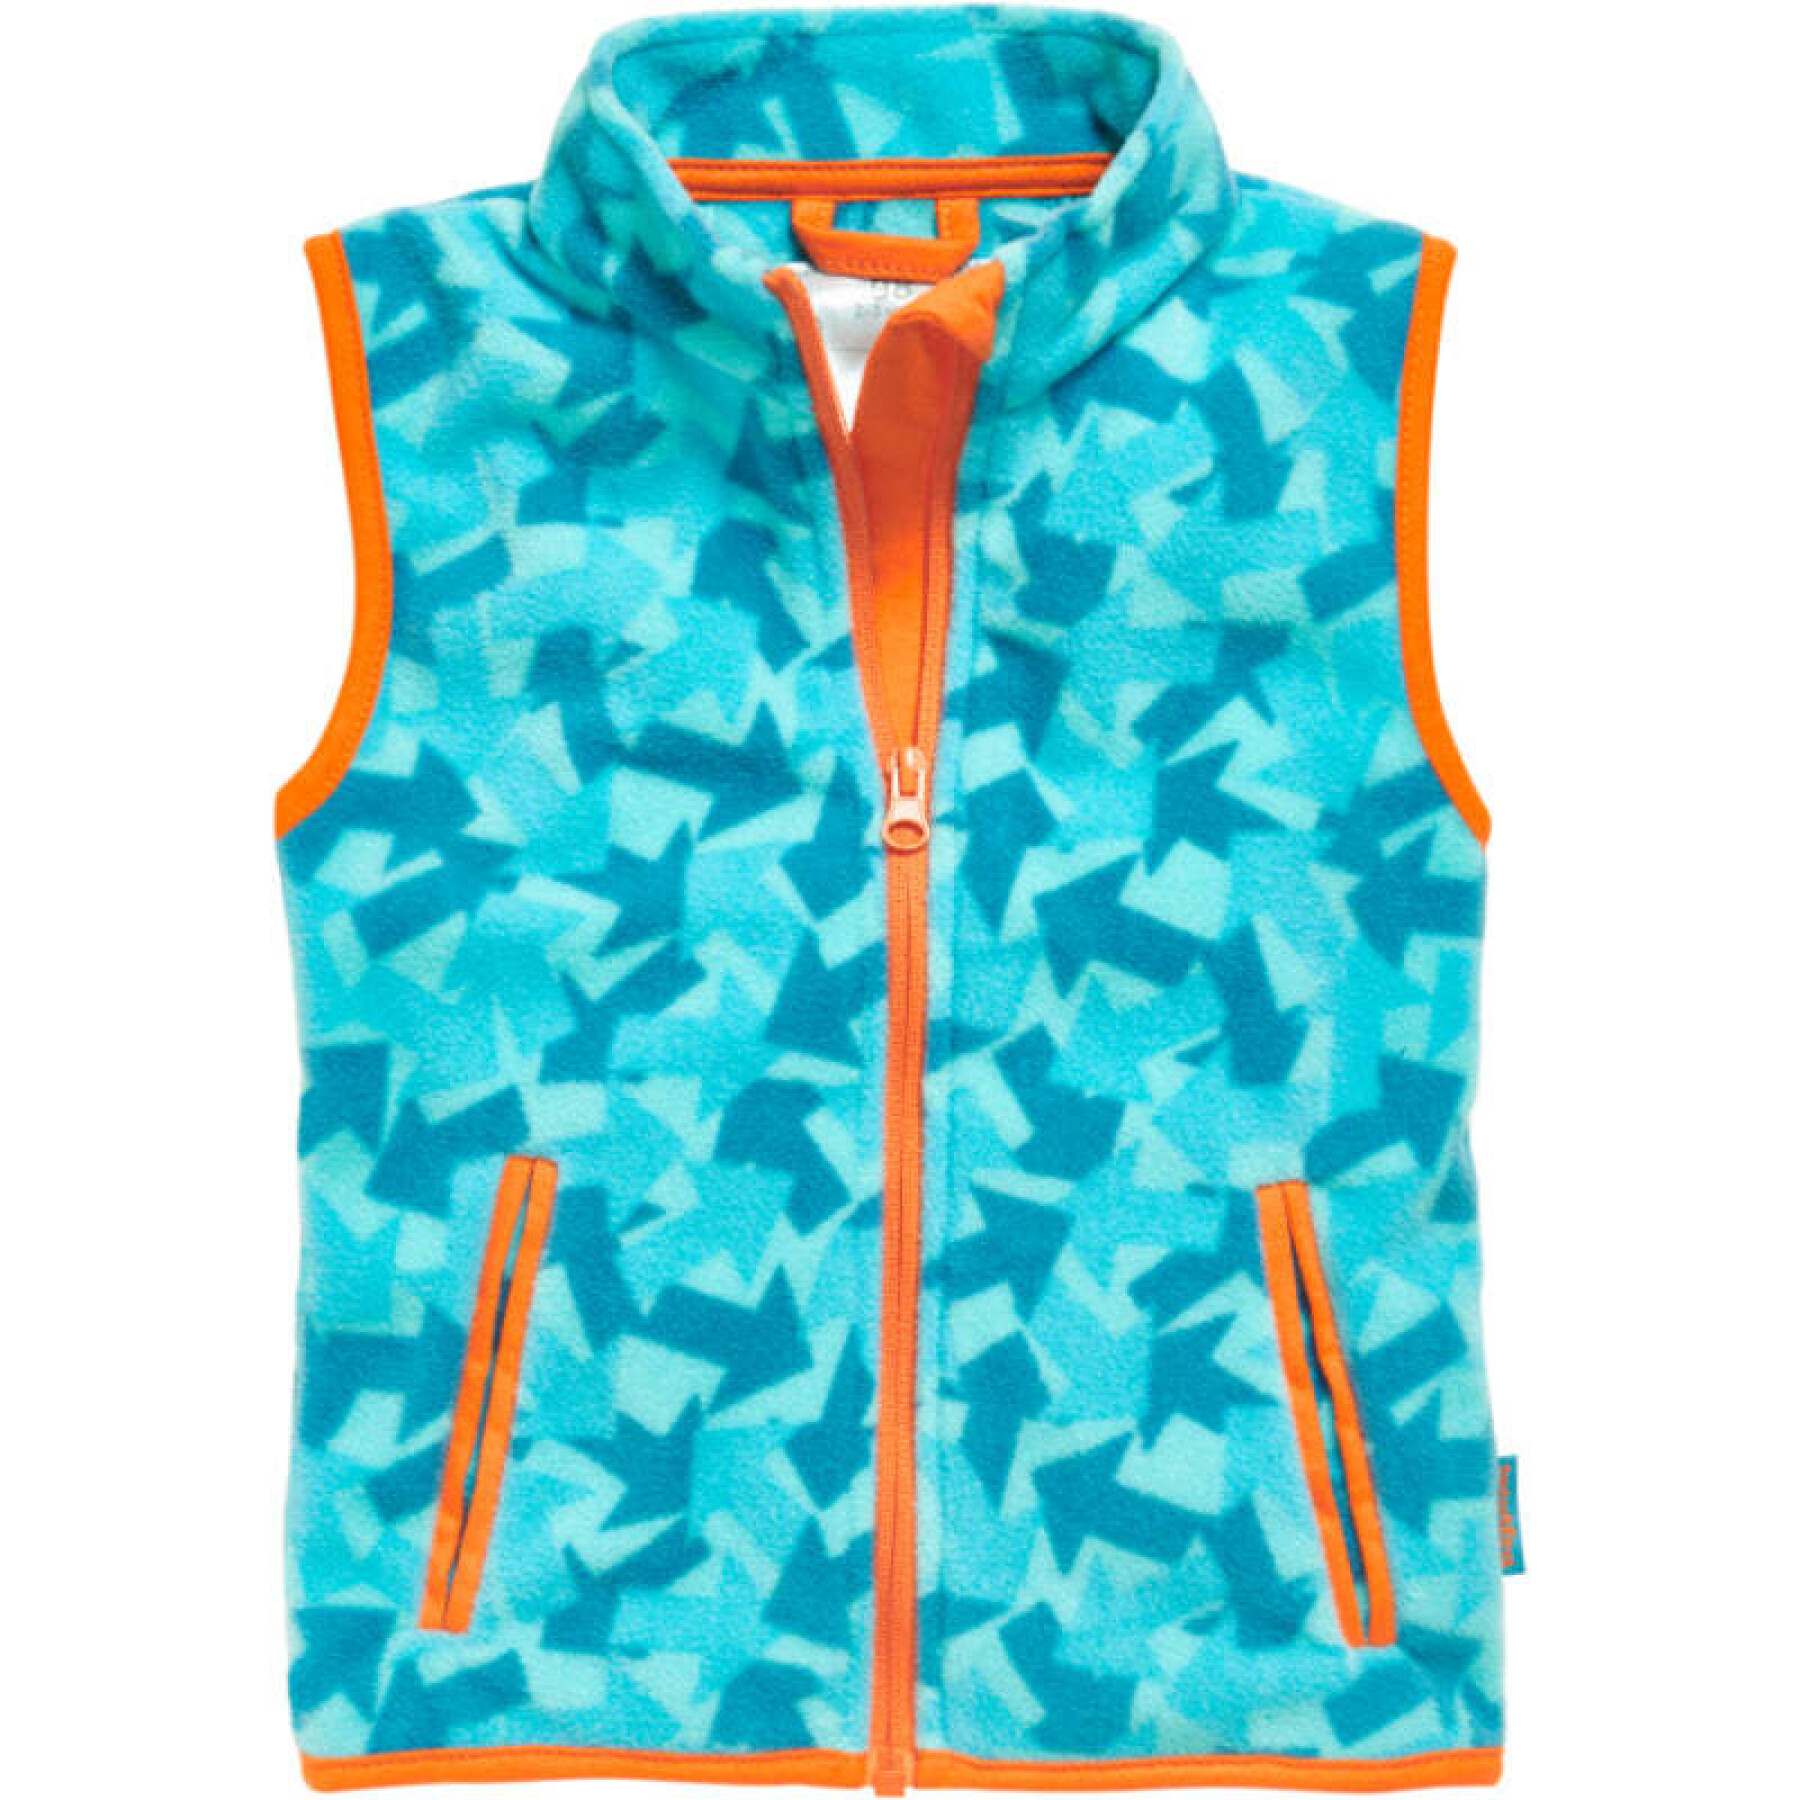 Gilet in pile per bambini Playshoes Arrows